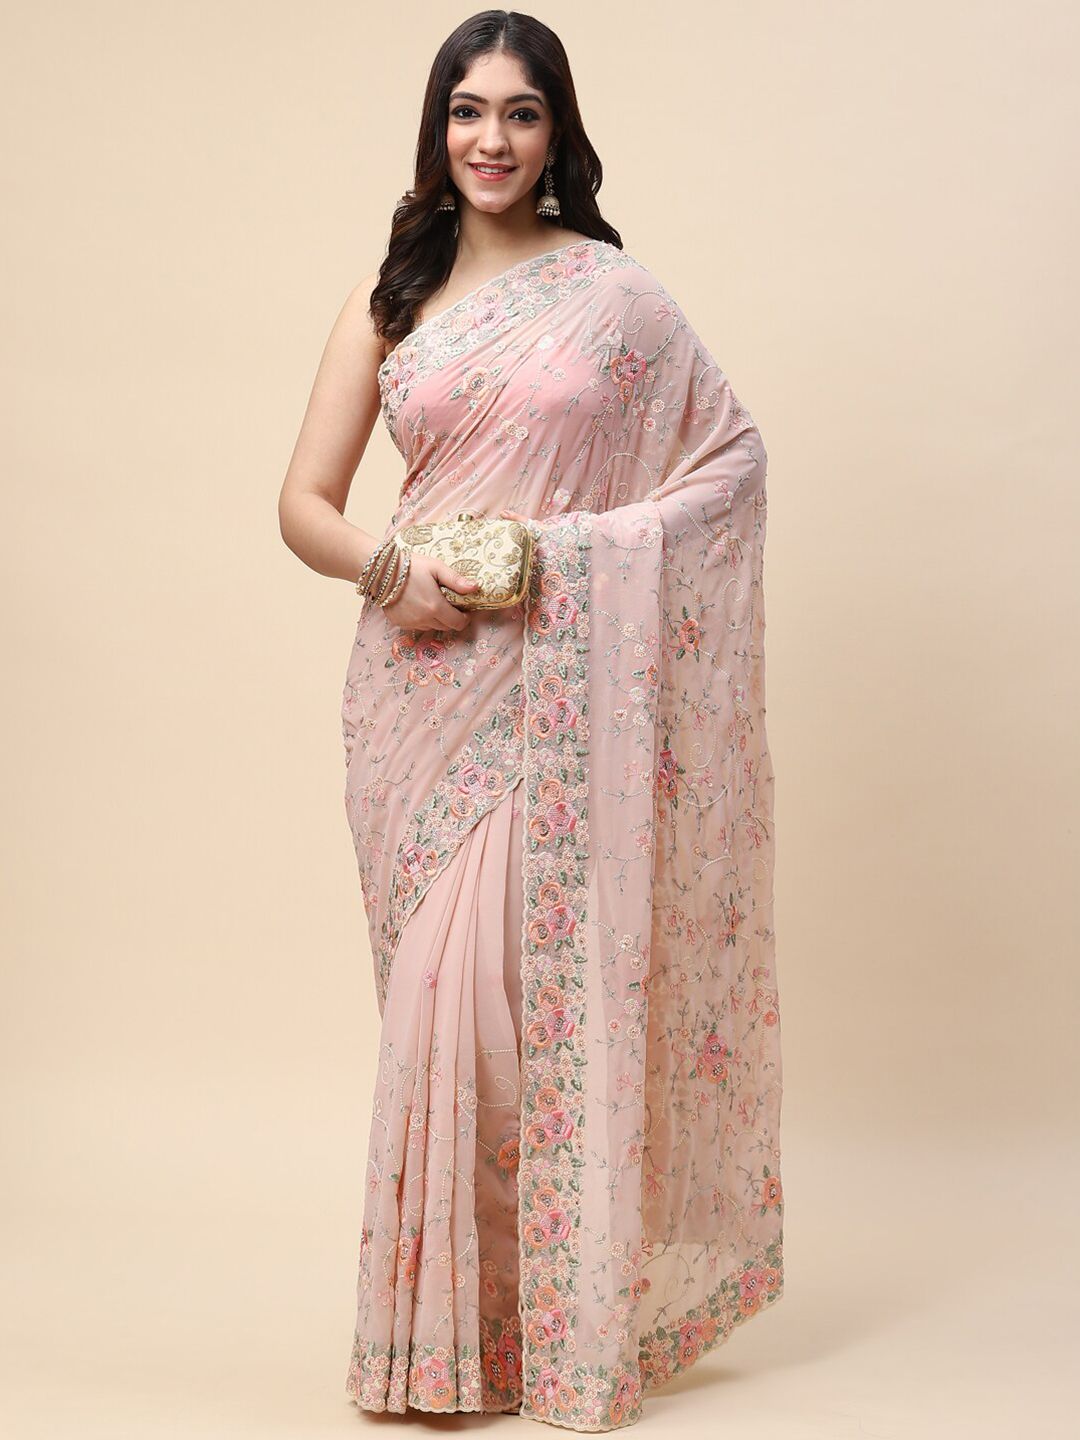 Meena Bazaar Peach-Coloured & Green Embellished Embroidered Saree Price in India